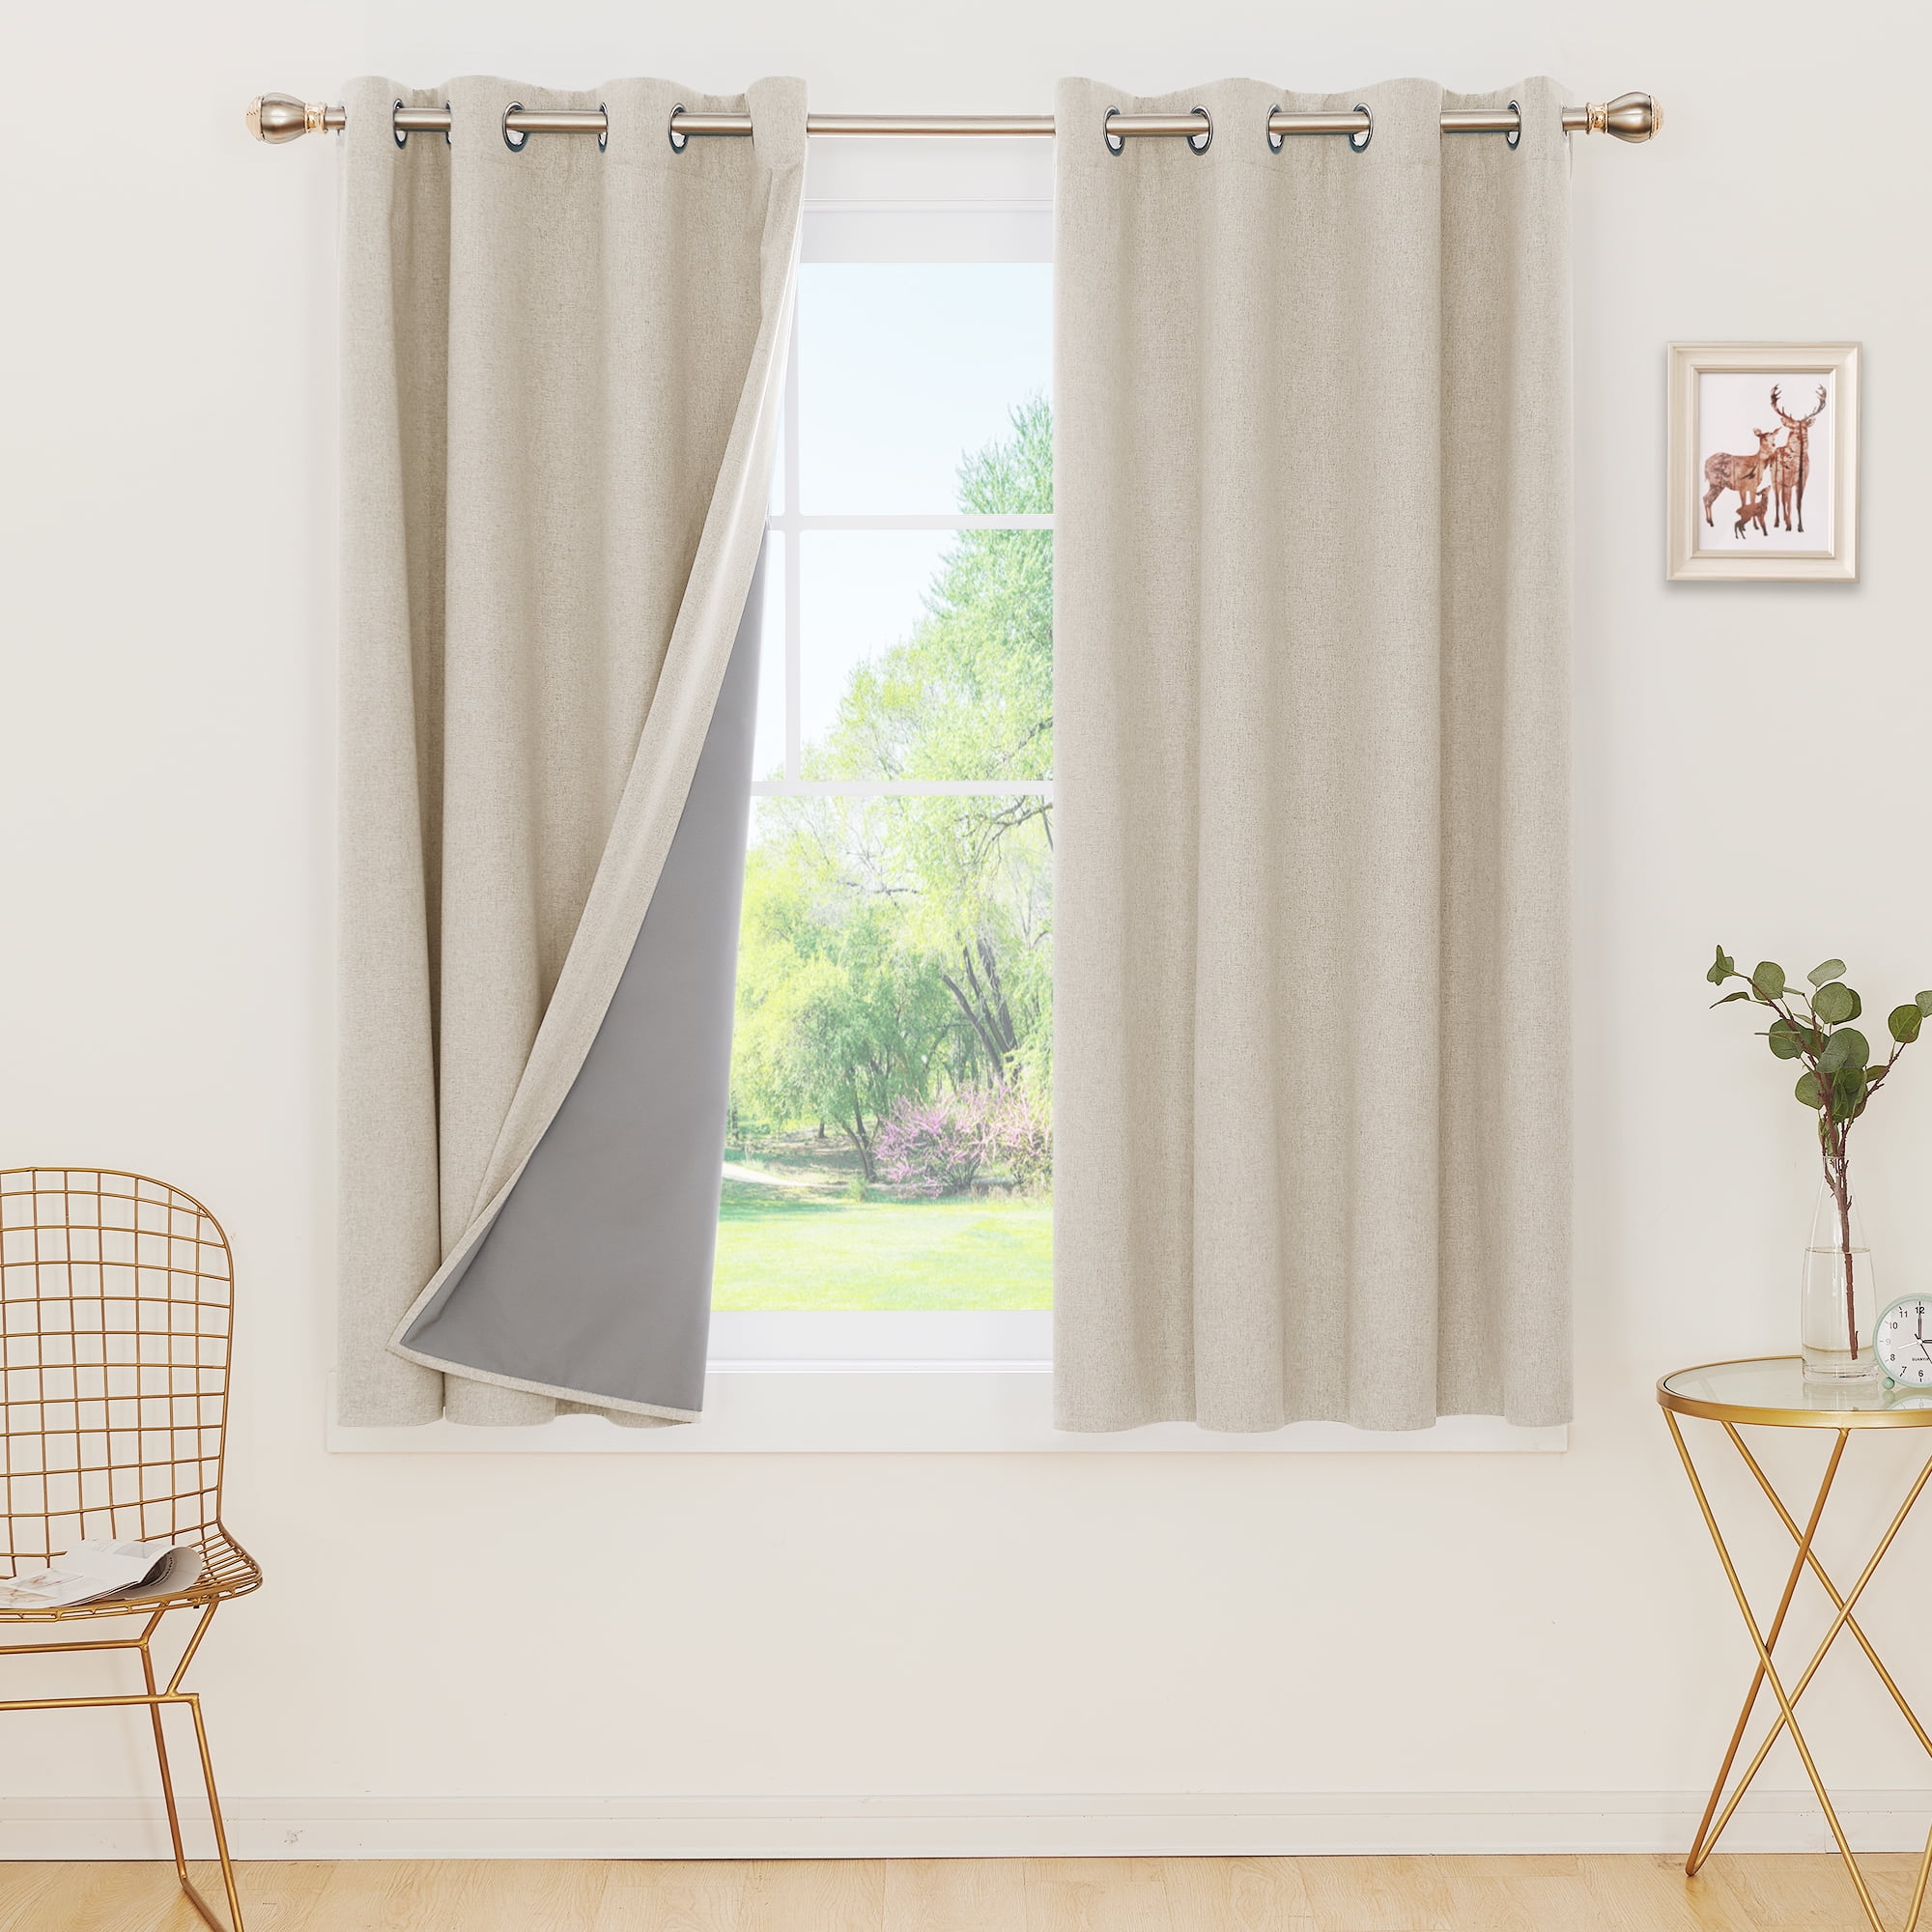 Deconovo Faux Linen Total Blackout Curtains 45 Inch Length 2 Panels Sound Reduction Short Curtains for Bedroom（Flaxen 2 Panels） 52W x 45L Inch Thermal Insulated Curtain Drapes with Coating 